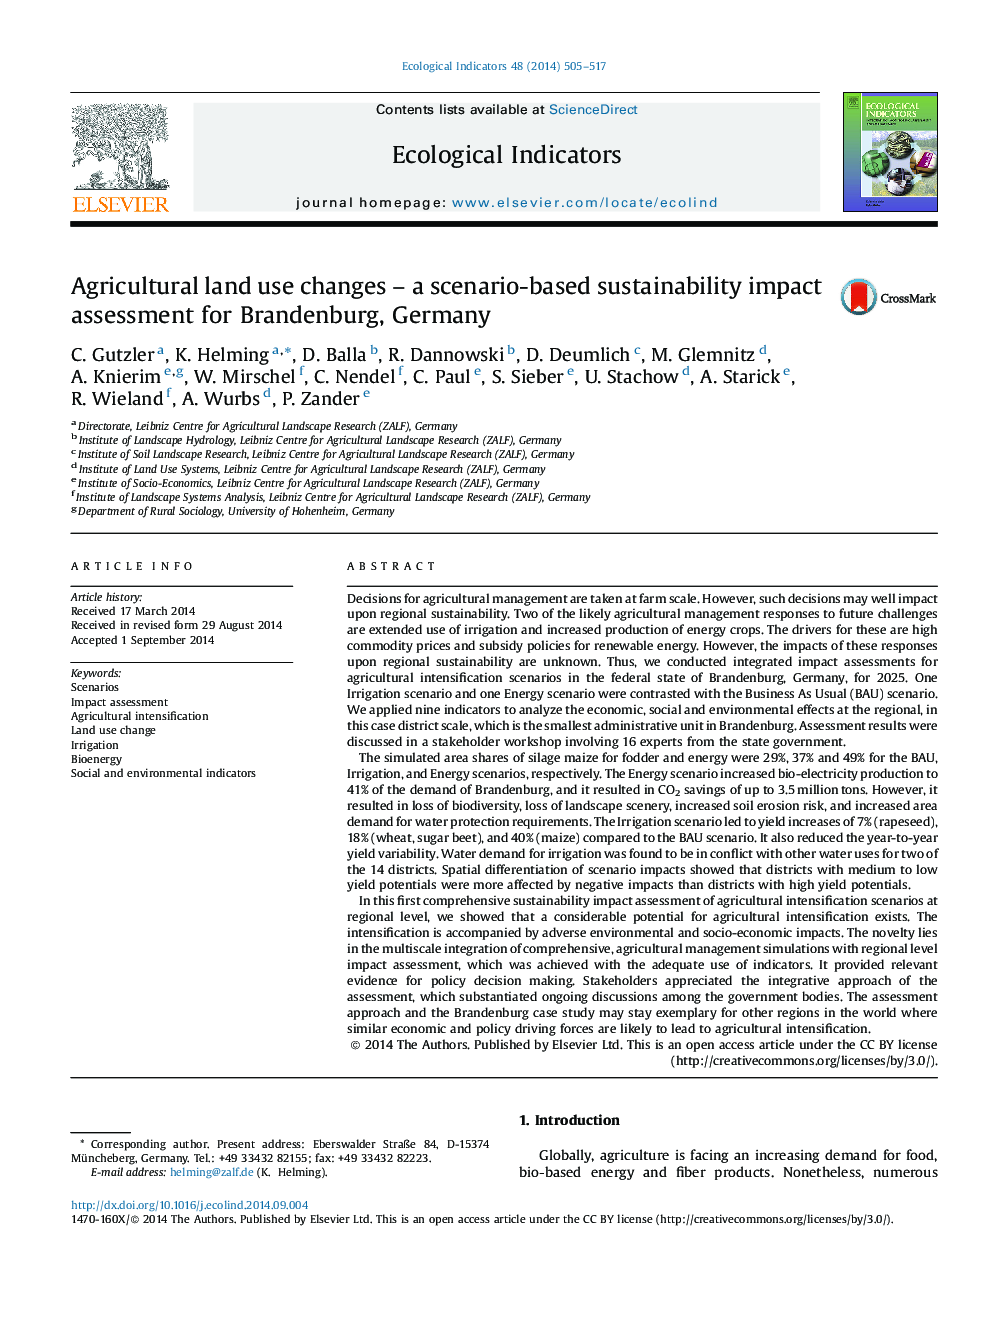 Agricultural land use changes - a scenario-based sustainability impact assessment for Brandenburg, Germany